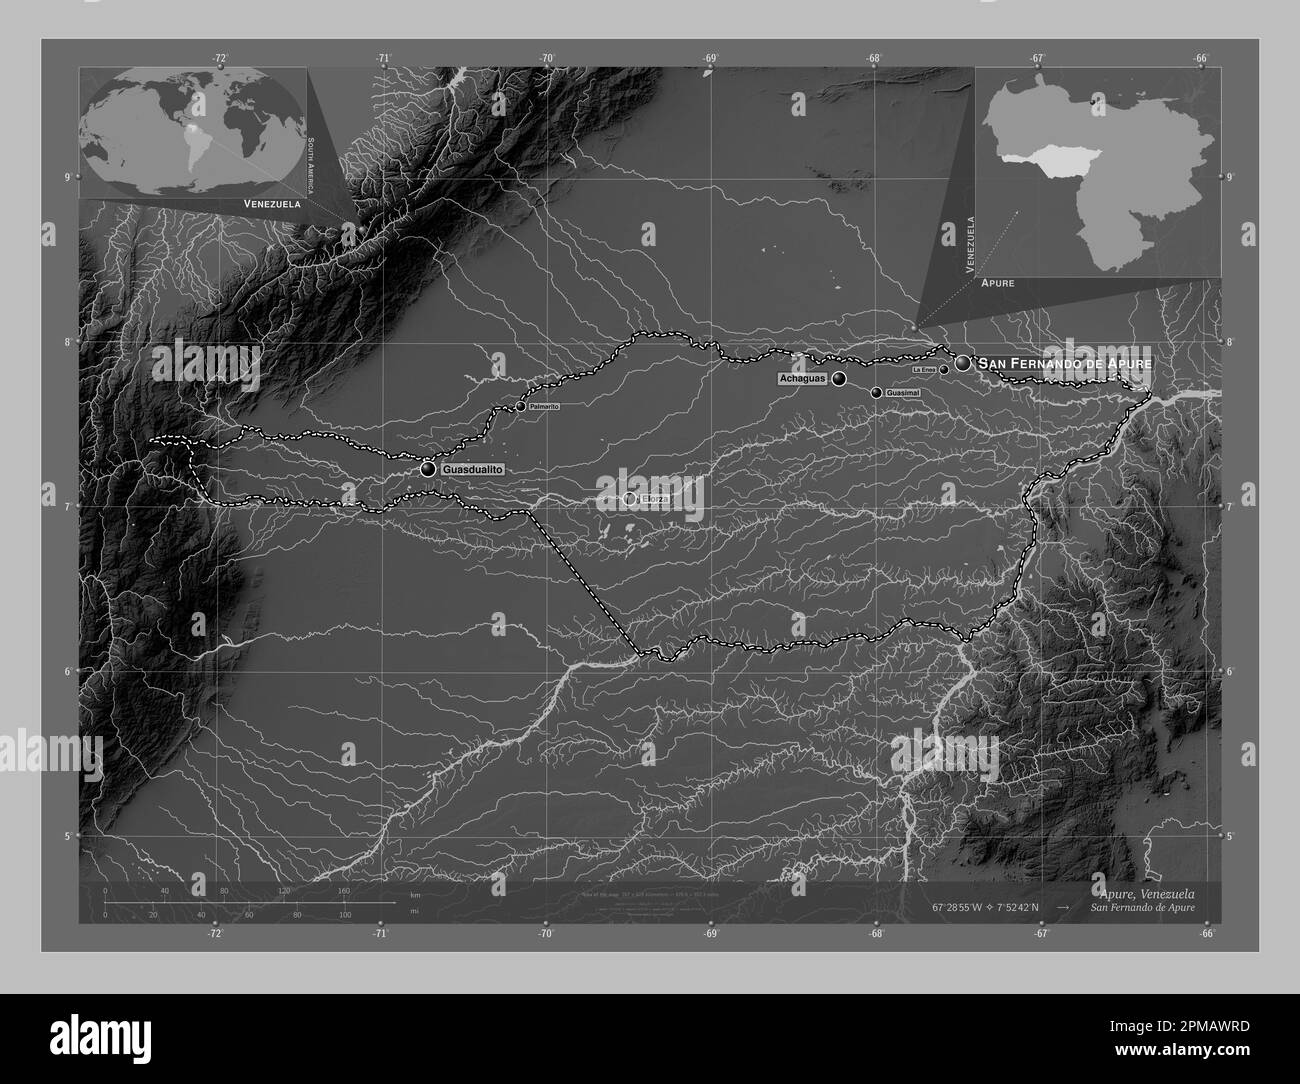 Apure, state of Venezuela. Grayscale elevation map with lakes and rivers. Locations and names of major cities of the region. Corner auxiliary location Stock Photo